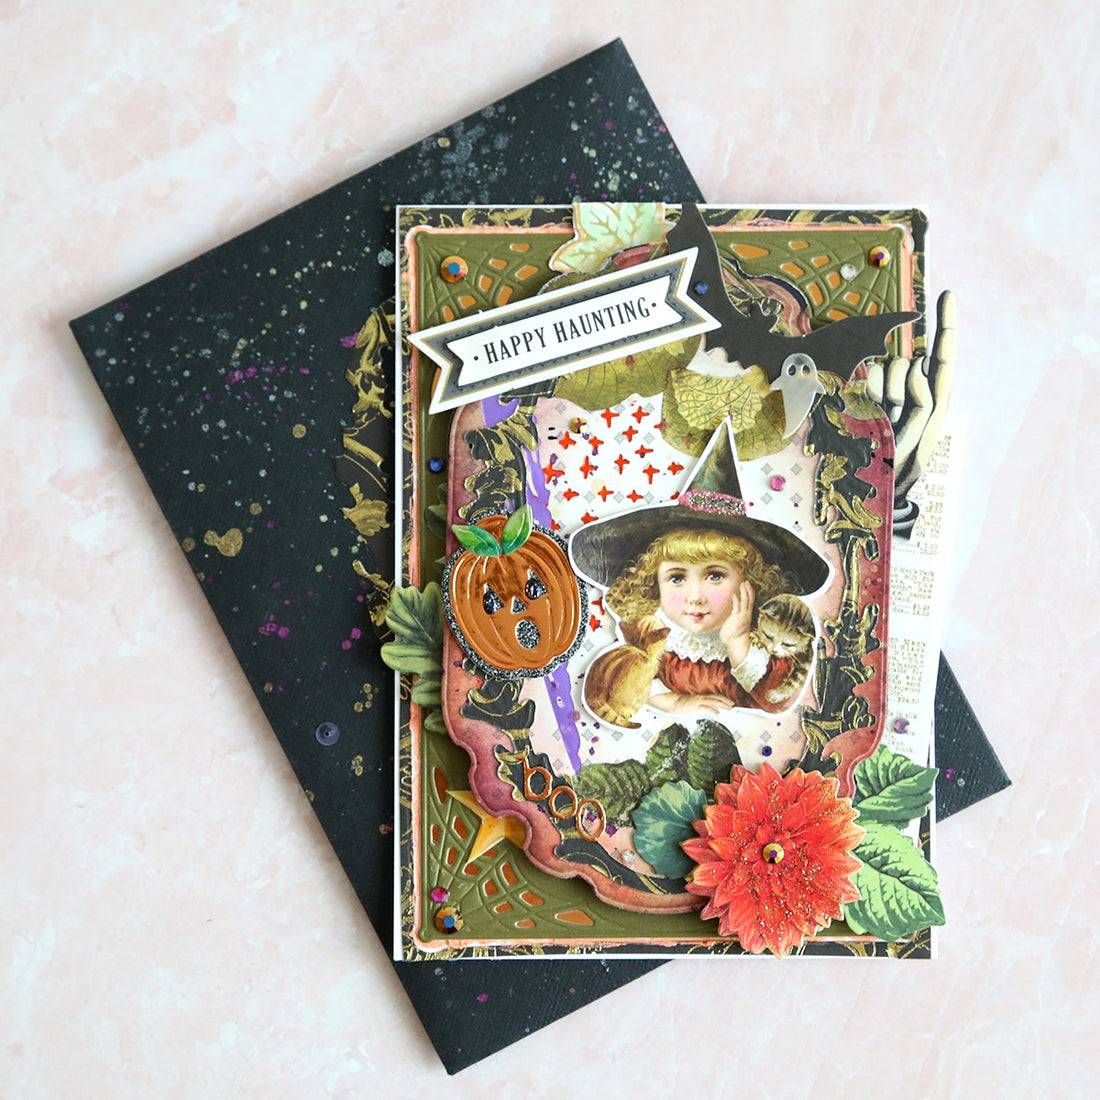 A card with a witch and flowers on it.